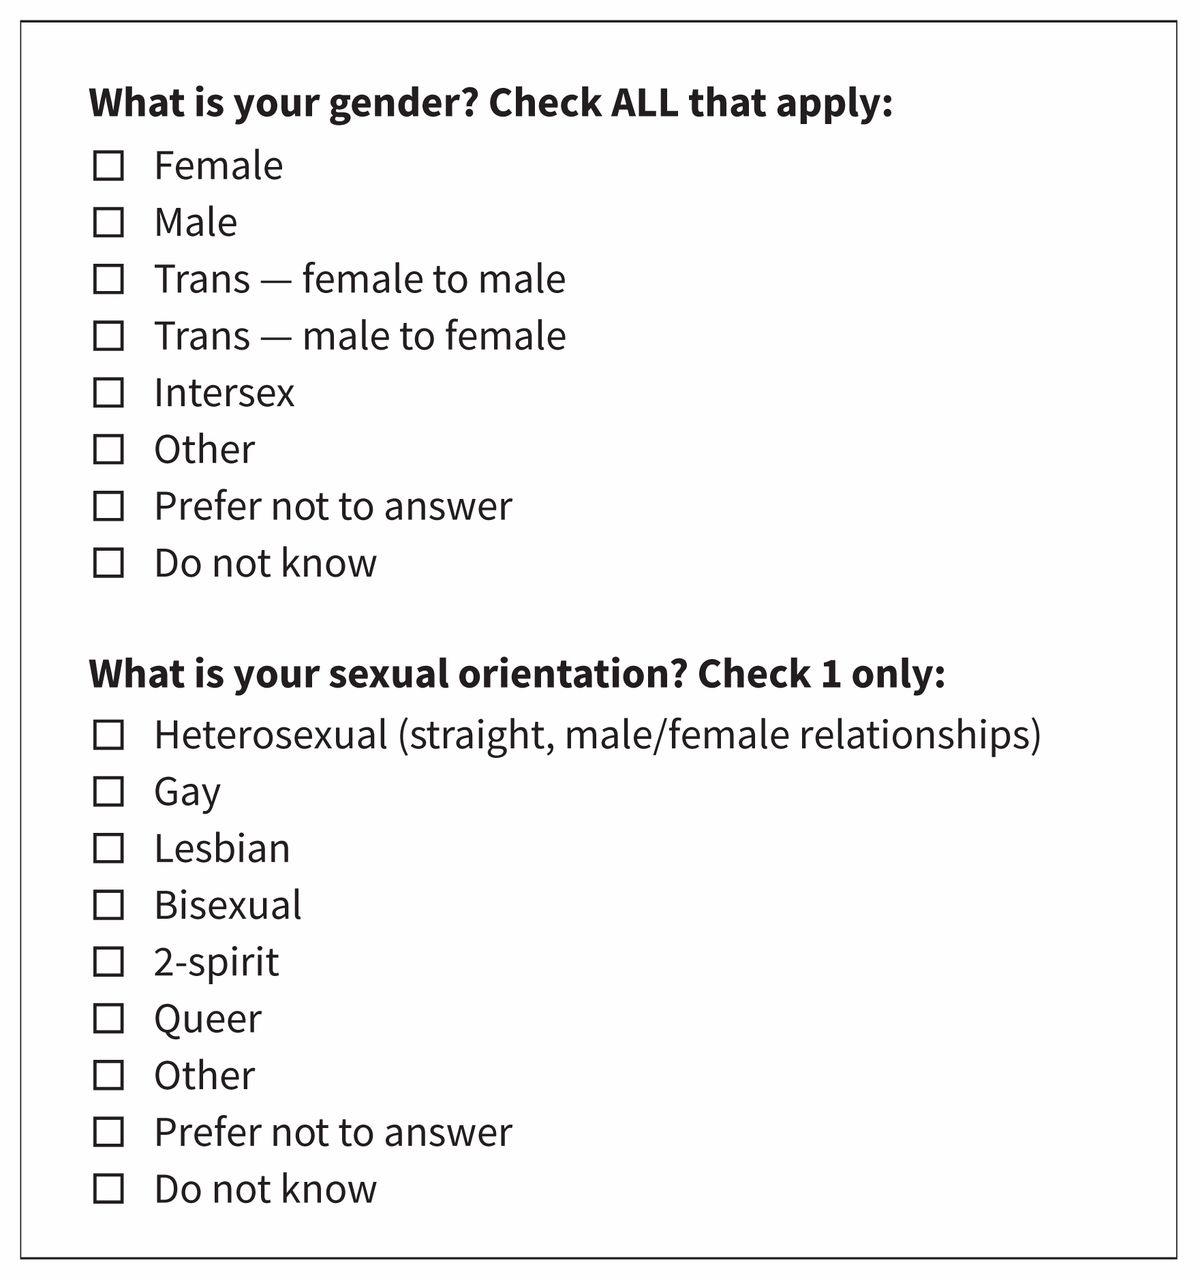 Routine Collection Of Sexual Orientation And Gender Identity Data A